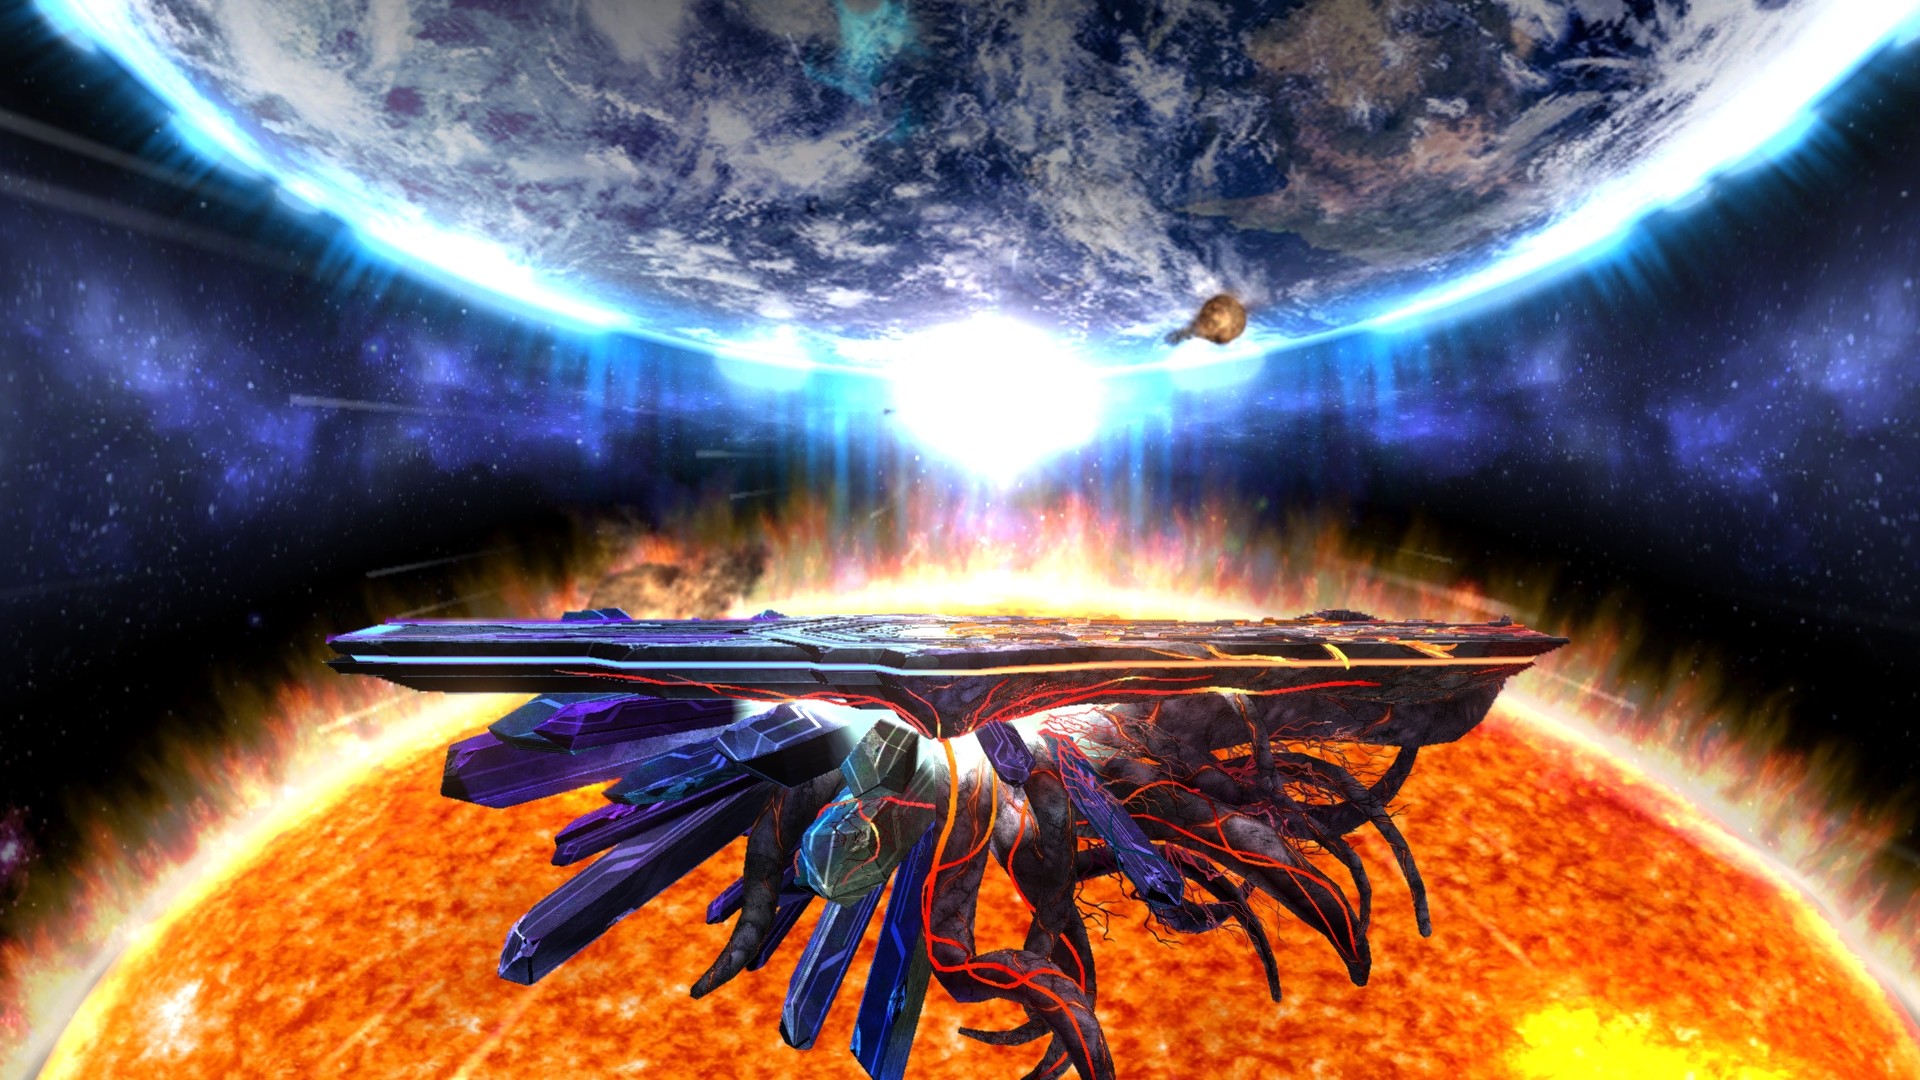 1920x1080 The New Final Destination has got me thinking... - Super Smash Bros. for  Wii U Message Board for Wii U - GameFAQs